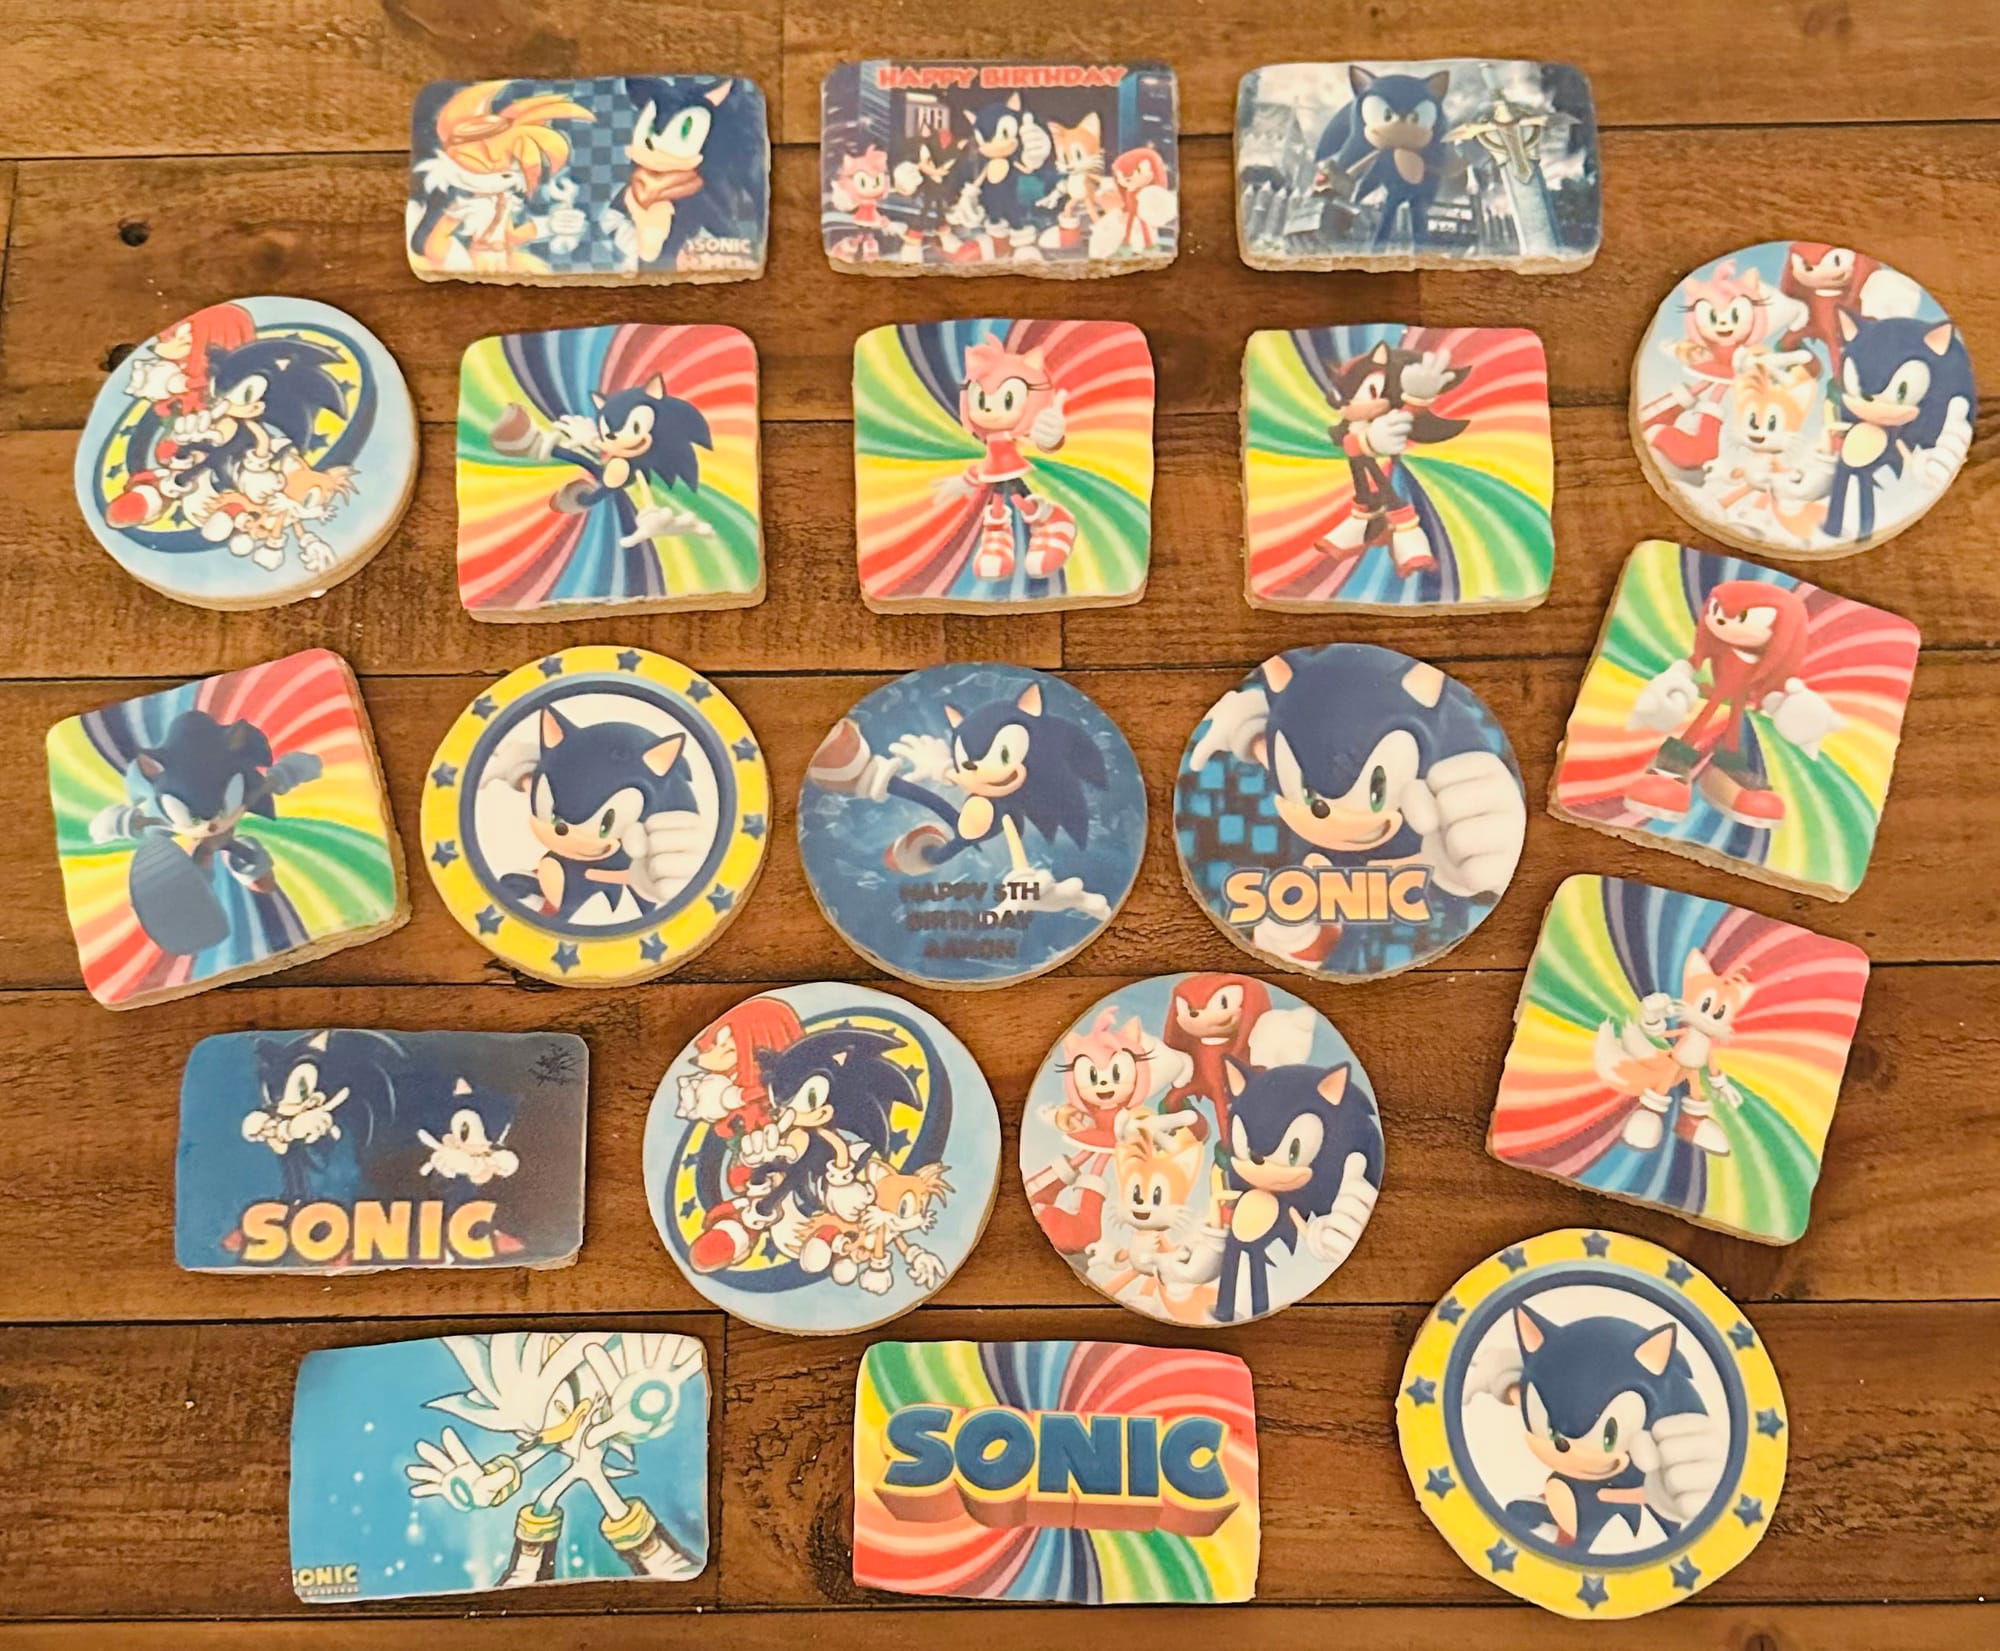 Sonic The Hedgehog Sugar Cookies with Royal Icing and Images